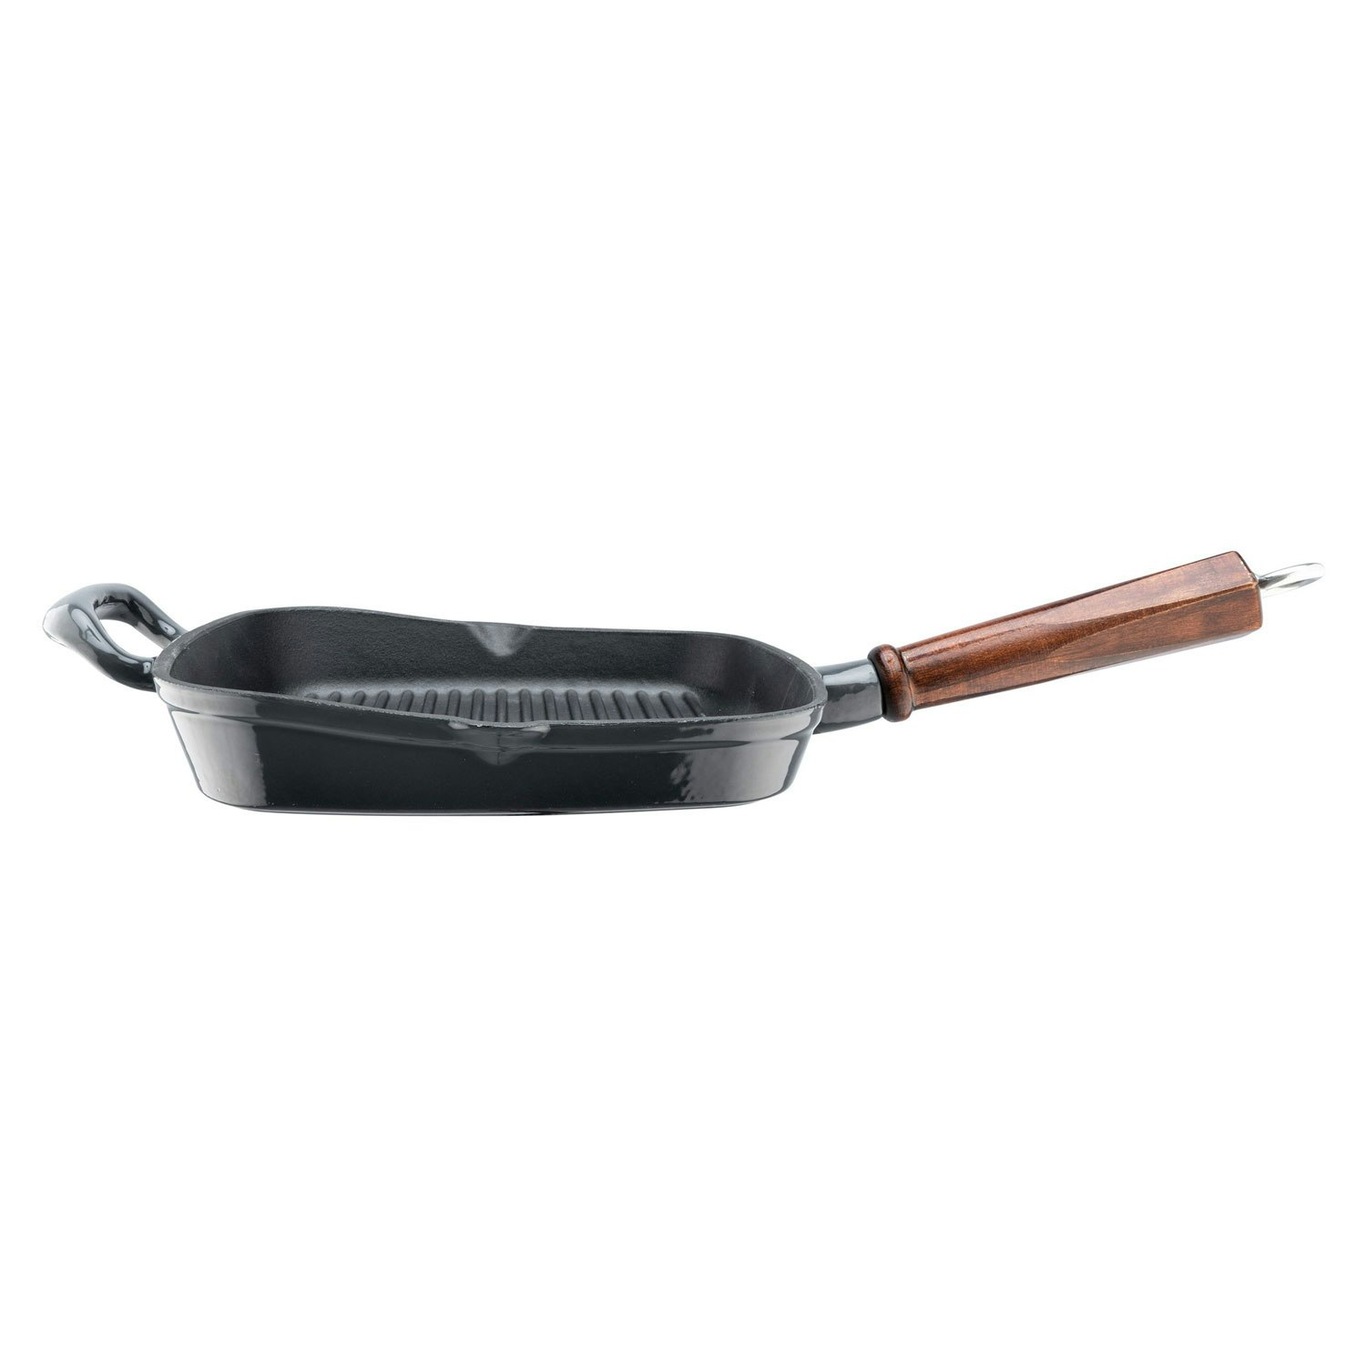 Staub - Frying pan - cast iron frying pan for induction with handle cm . 26